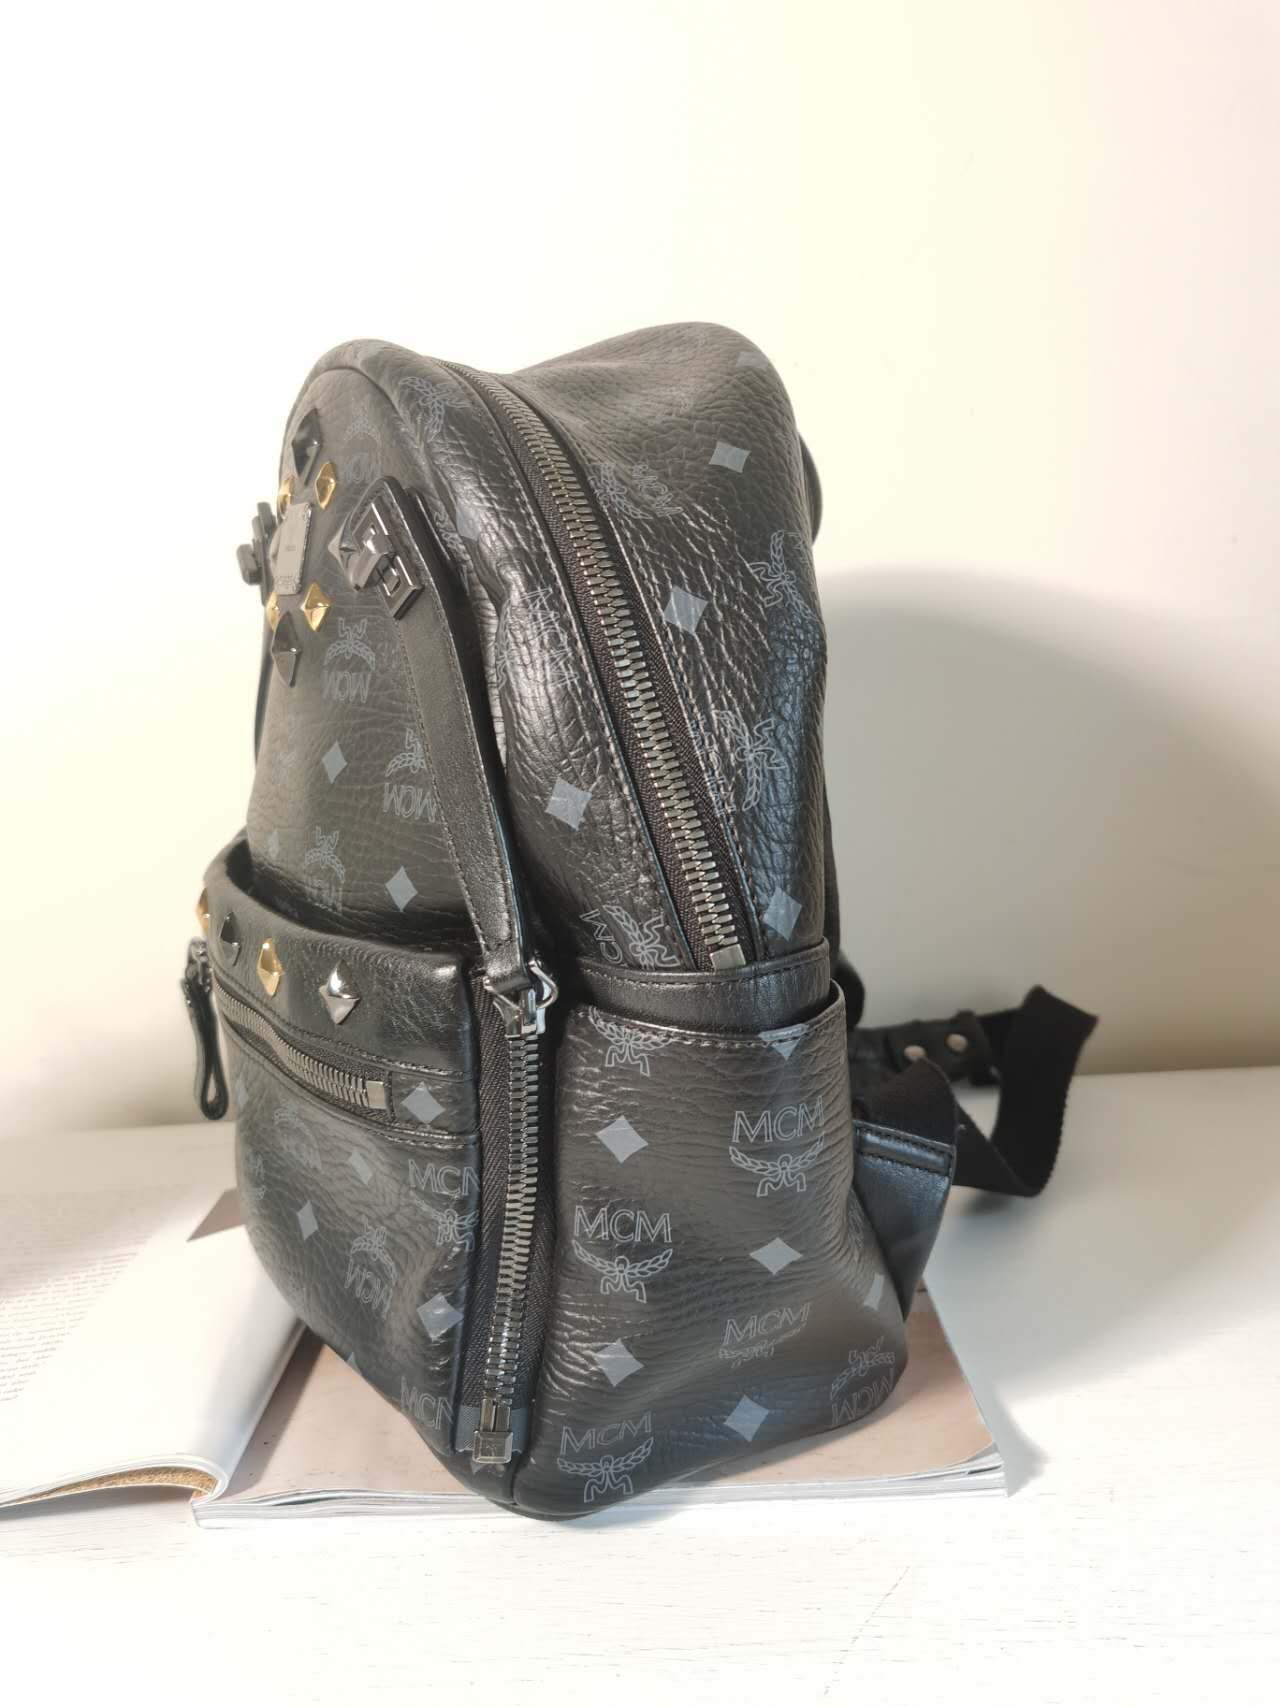 MCM Small Backpack one size Black bag